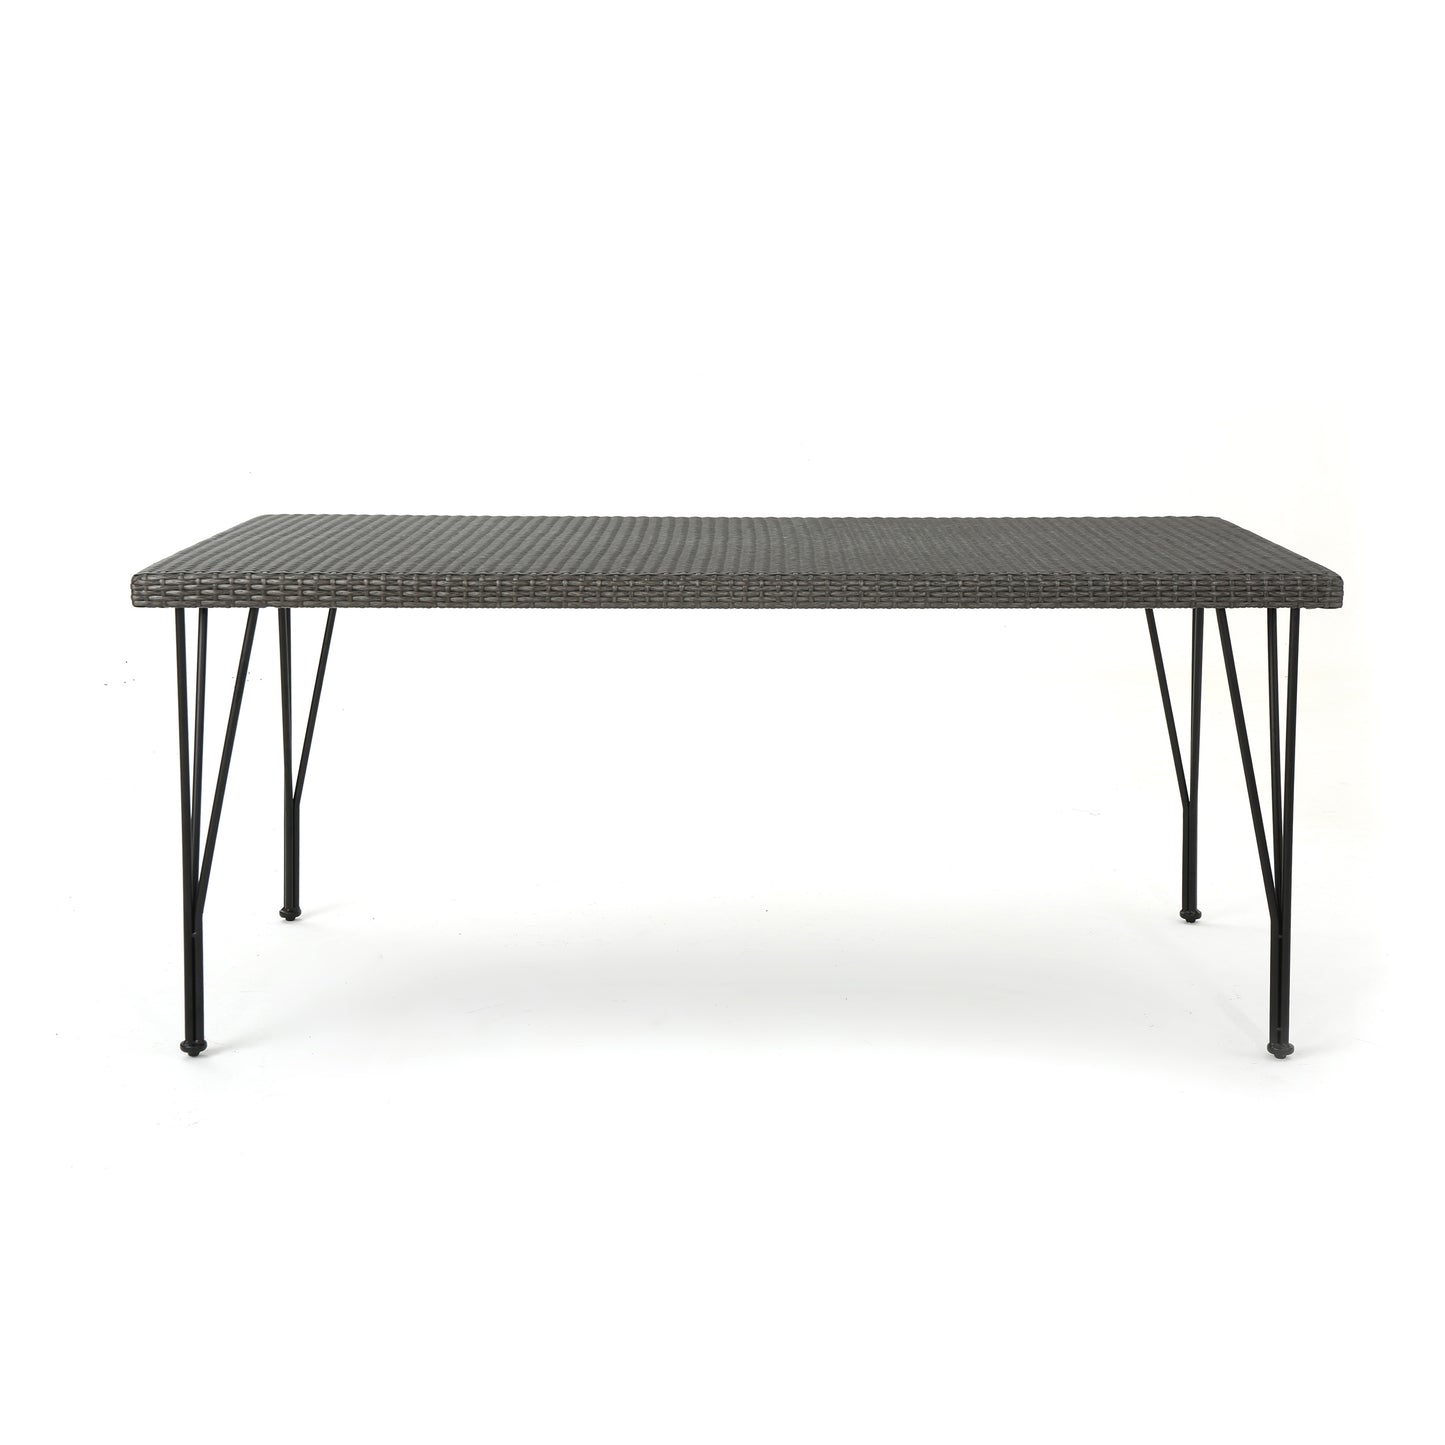 Belmy Outdoor Gray Wicker Rectangular Dining Table with Hair Pin Legs